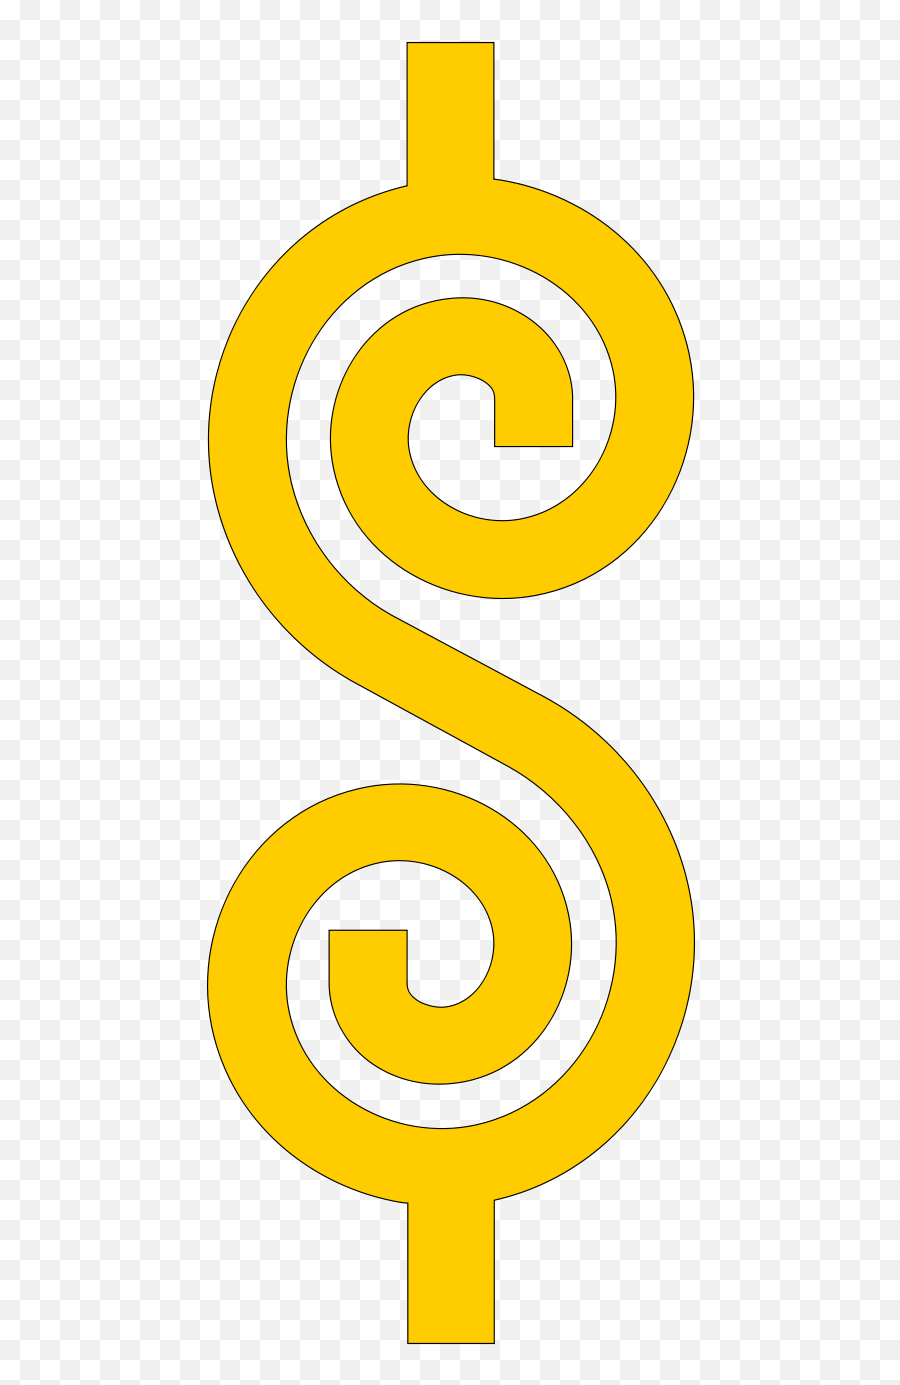 Free Image Of Dollar Sign Download Free Clip Art Free Clip - Price Is Right Svg Emoji,Dollar Sign Emoticon